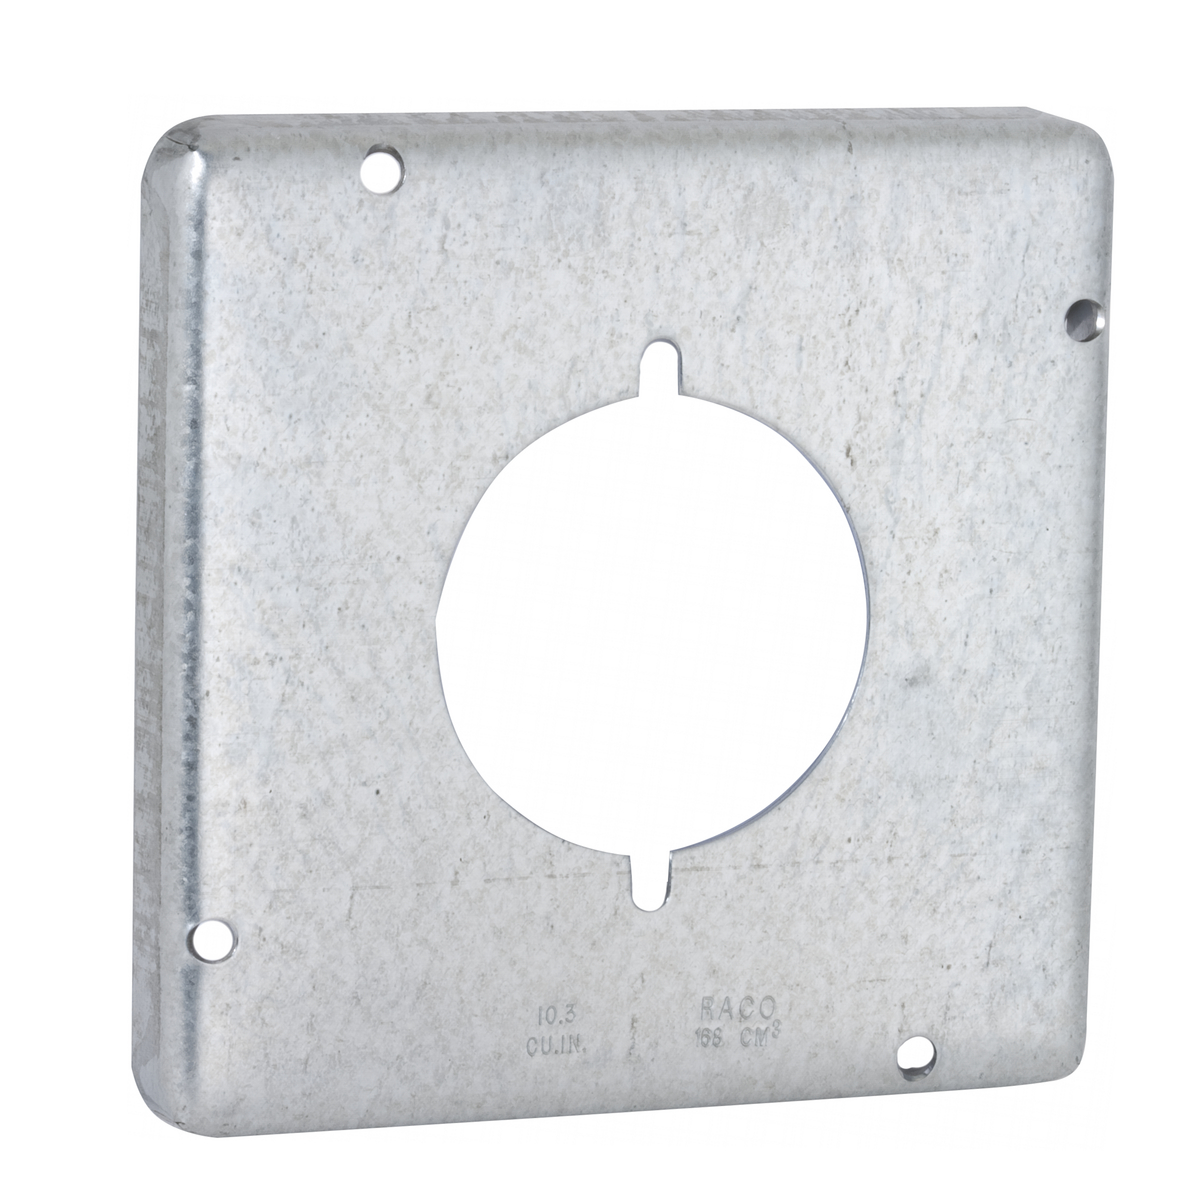 RACO 878 4-11/16" SQUARE EXPOSED WORK COVER, 30-50A RECEPTACLE 2.141 IN